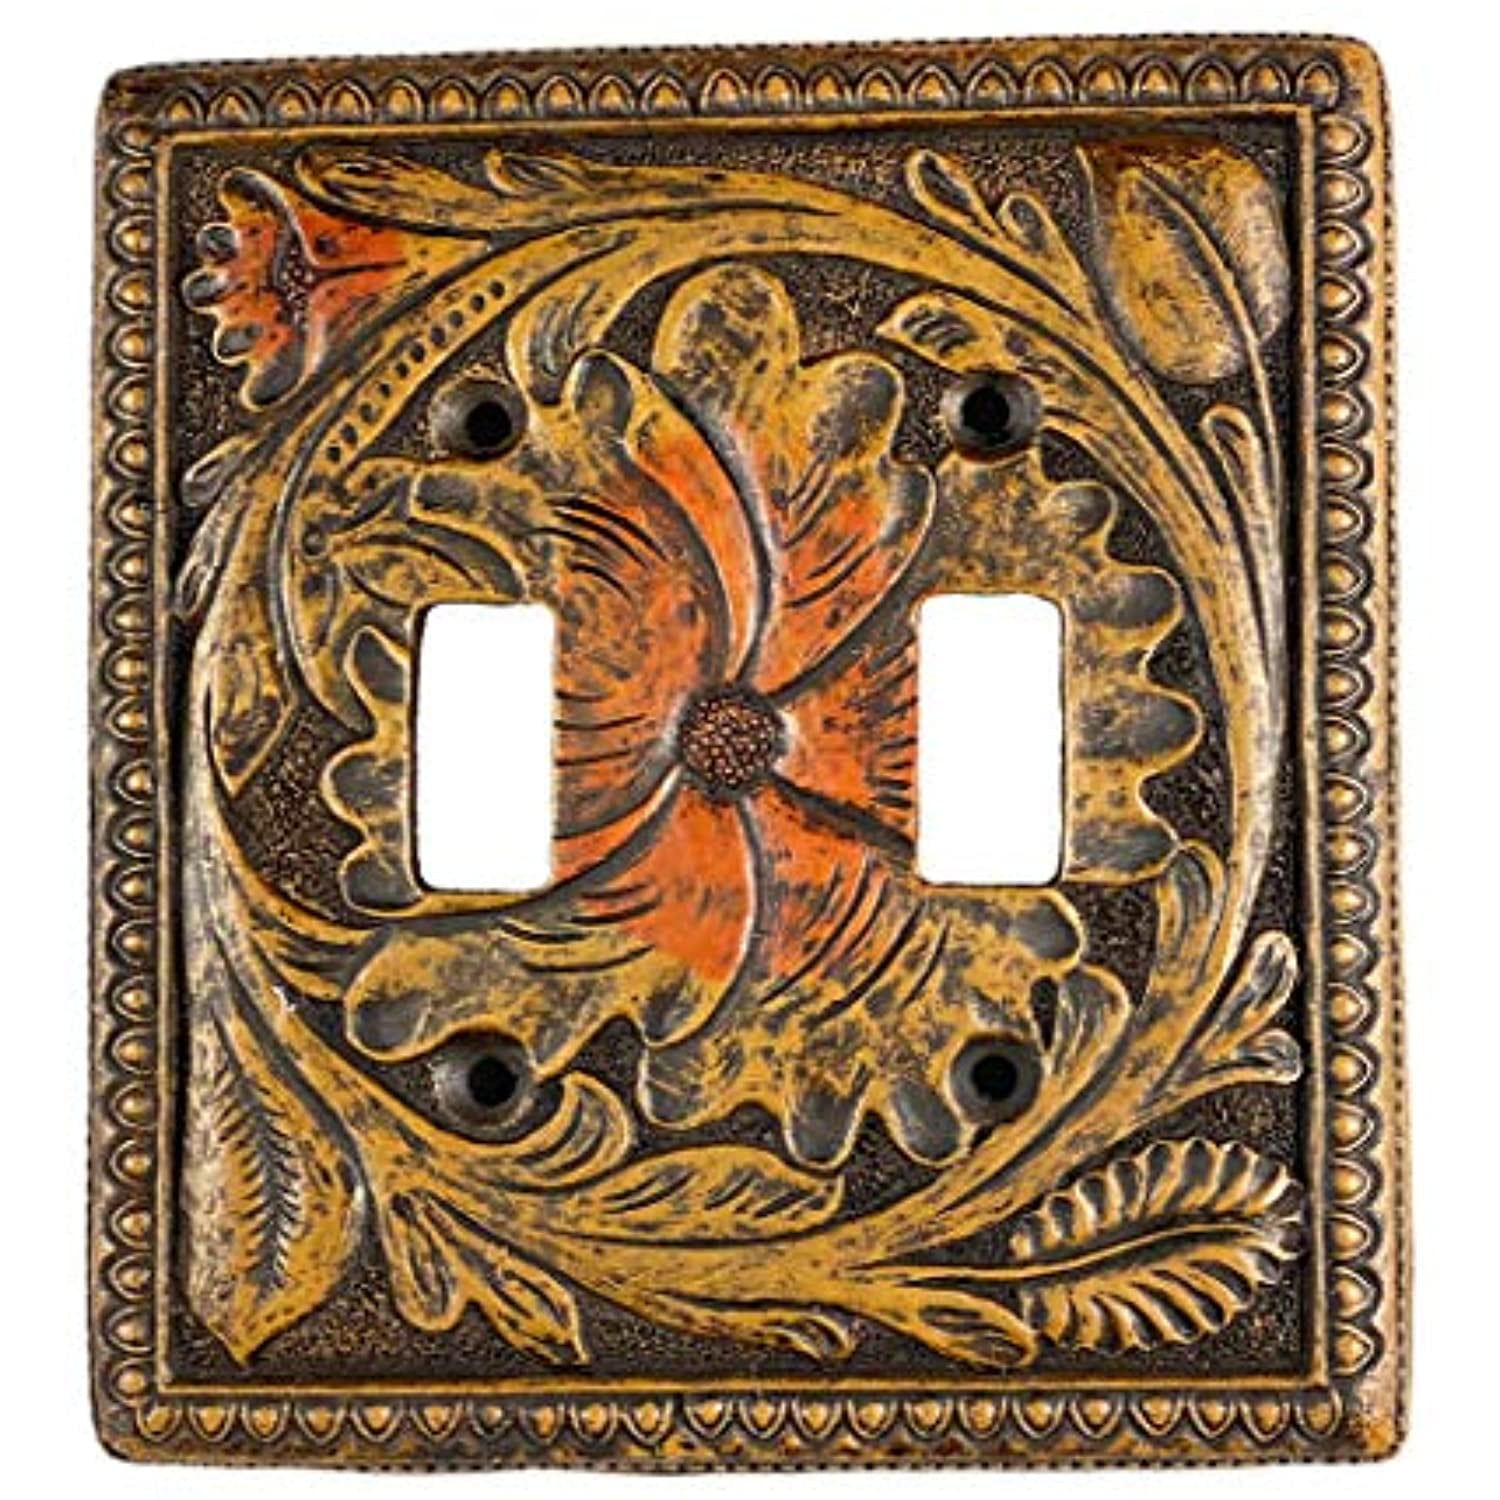 COPPER PATINA TURQUOISE DESIGN LOOK  LIGHT SWITCH PLATE COVER WALL DECOR 